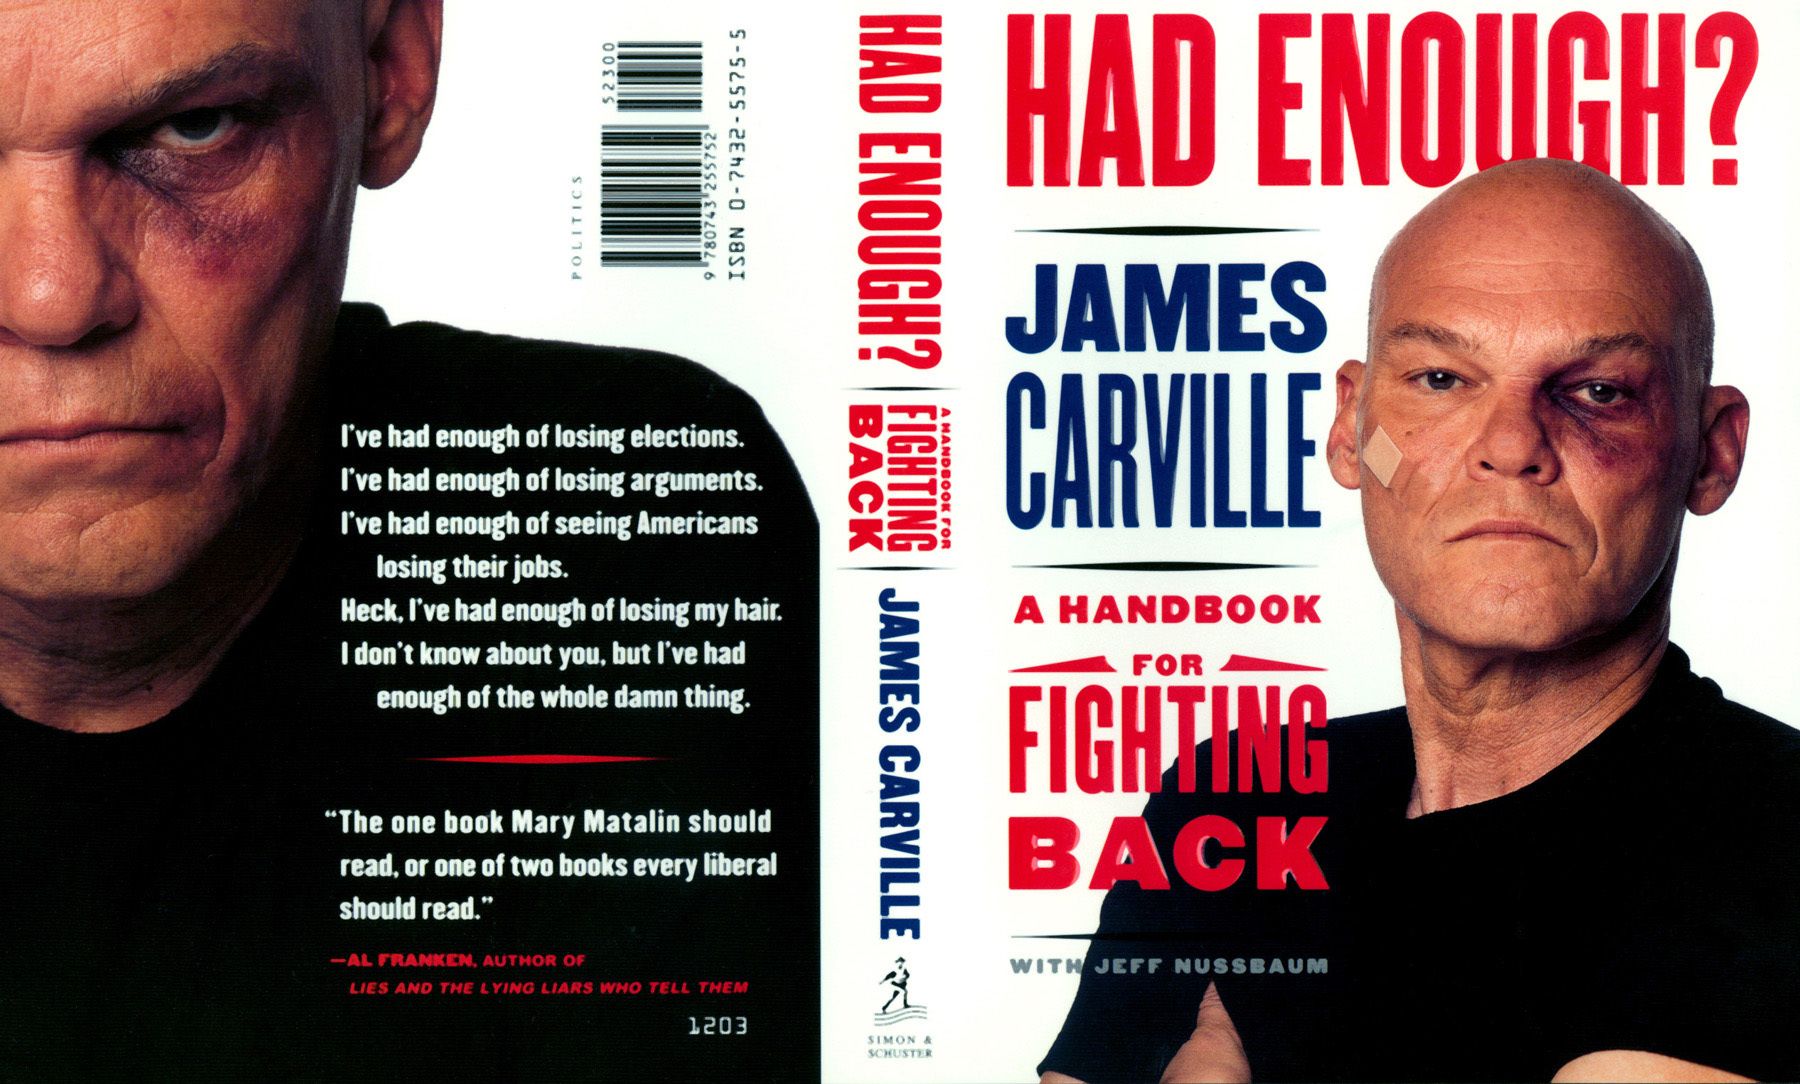 "Had Enough?", James Carville